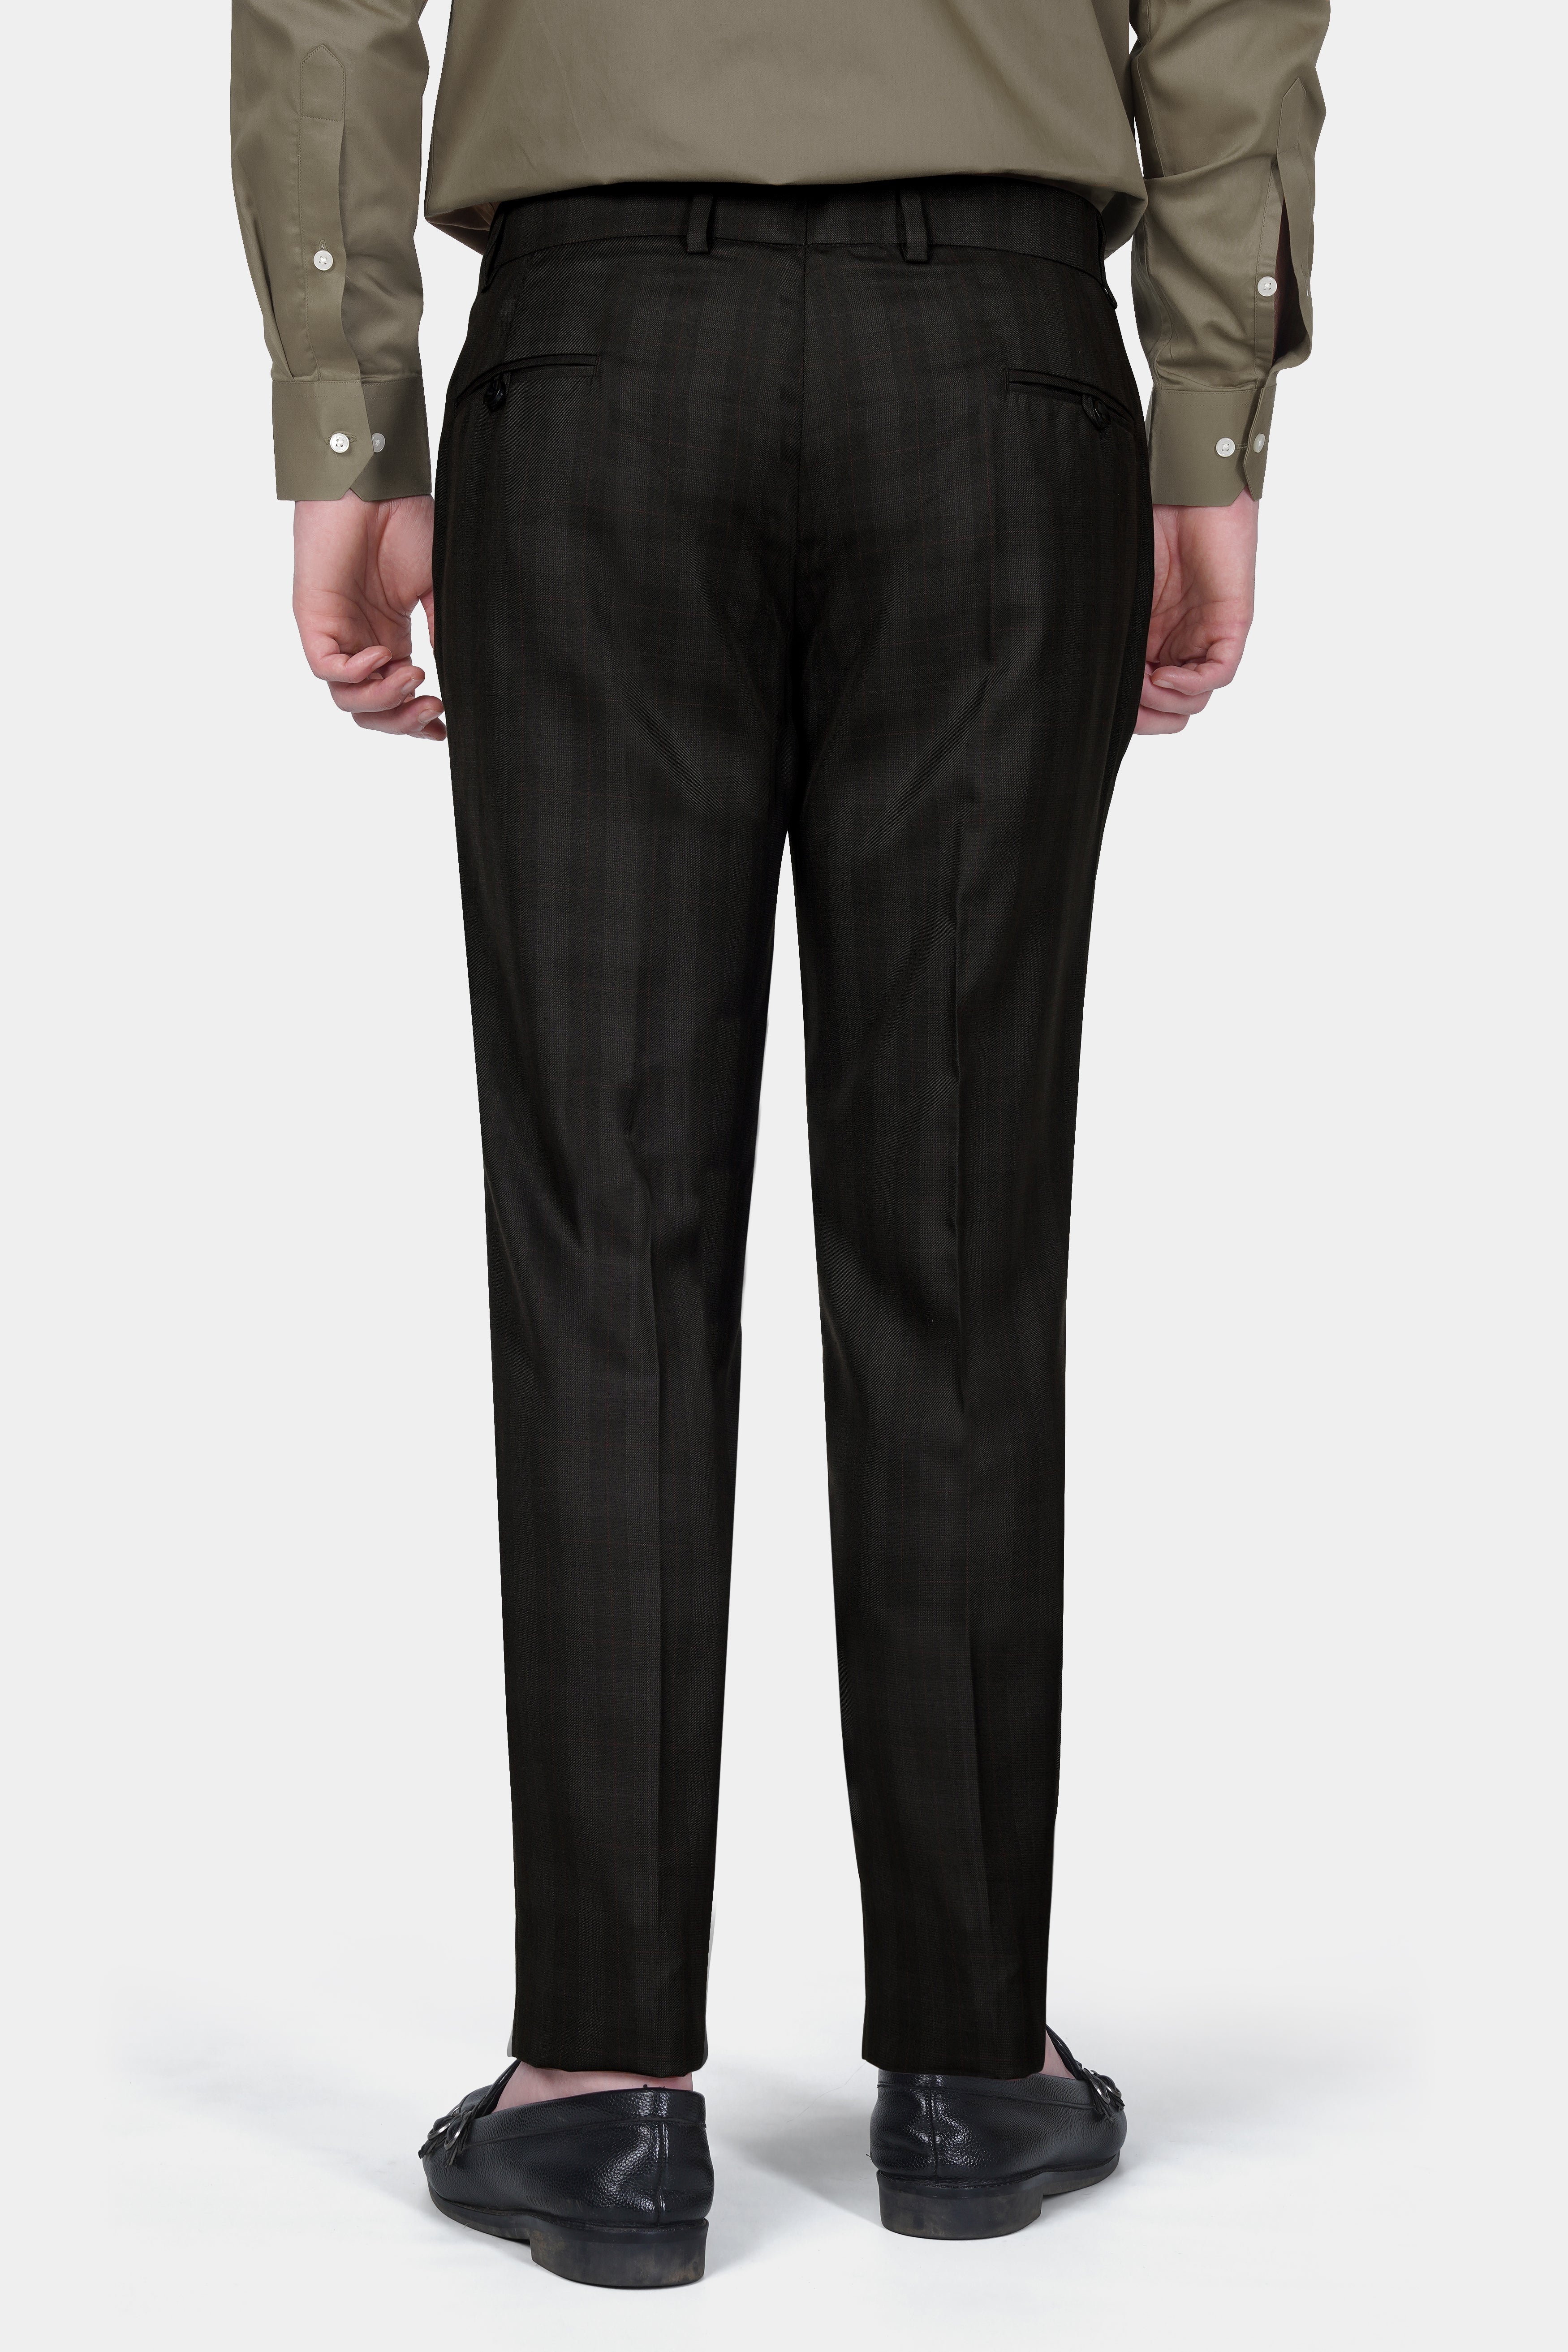 Buy Men's Black Structured Solid Suit Trouser @Tailorman Custom Made Ready  To Wear Trousers